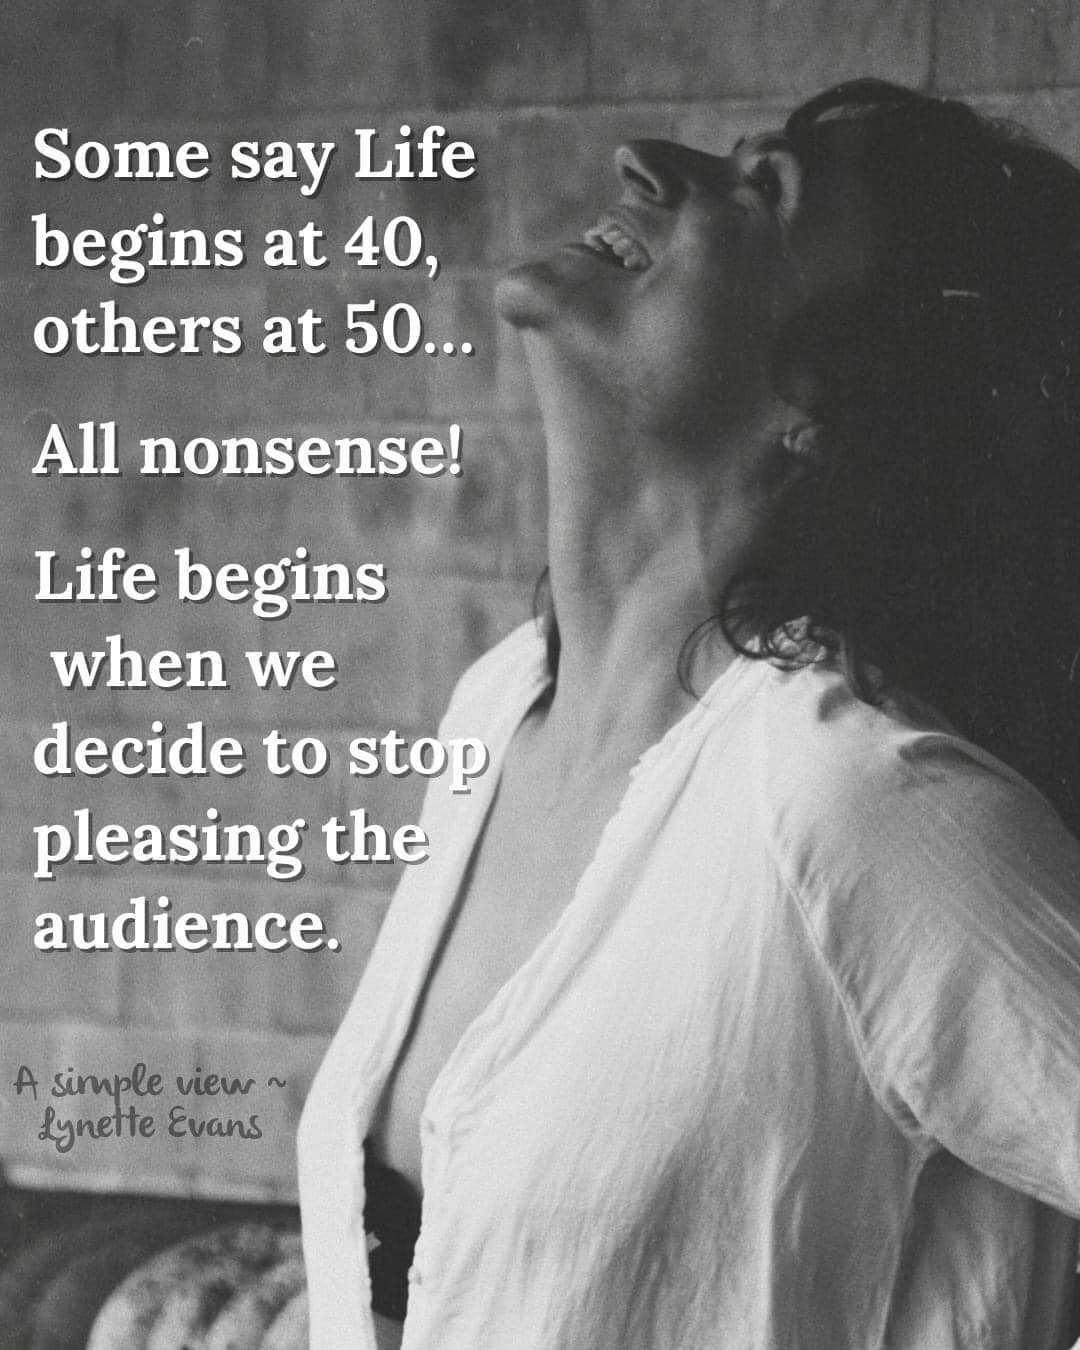 Some say life begins at 40 other at 50. All nonsense! Life begins when we decide to stop pleasing the audience. .jpg